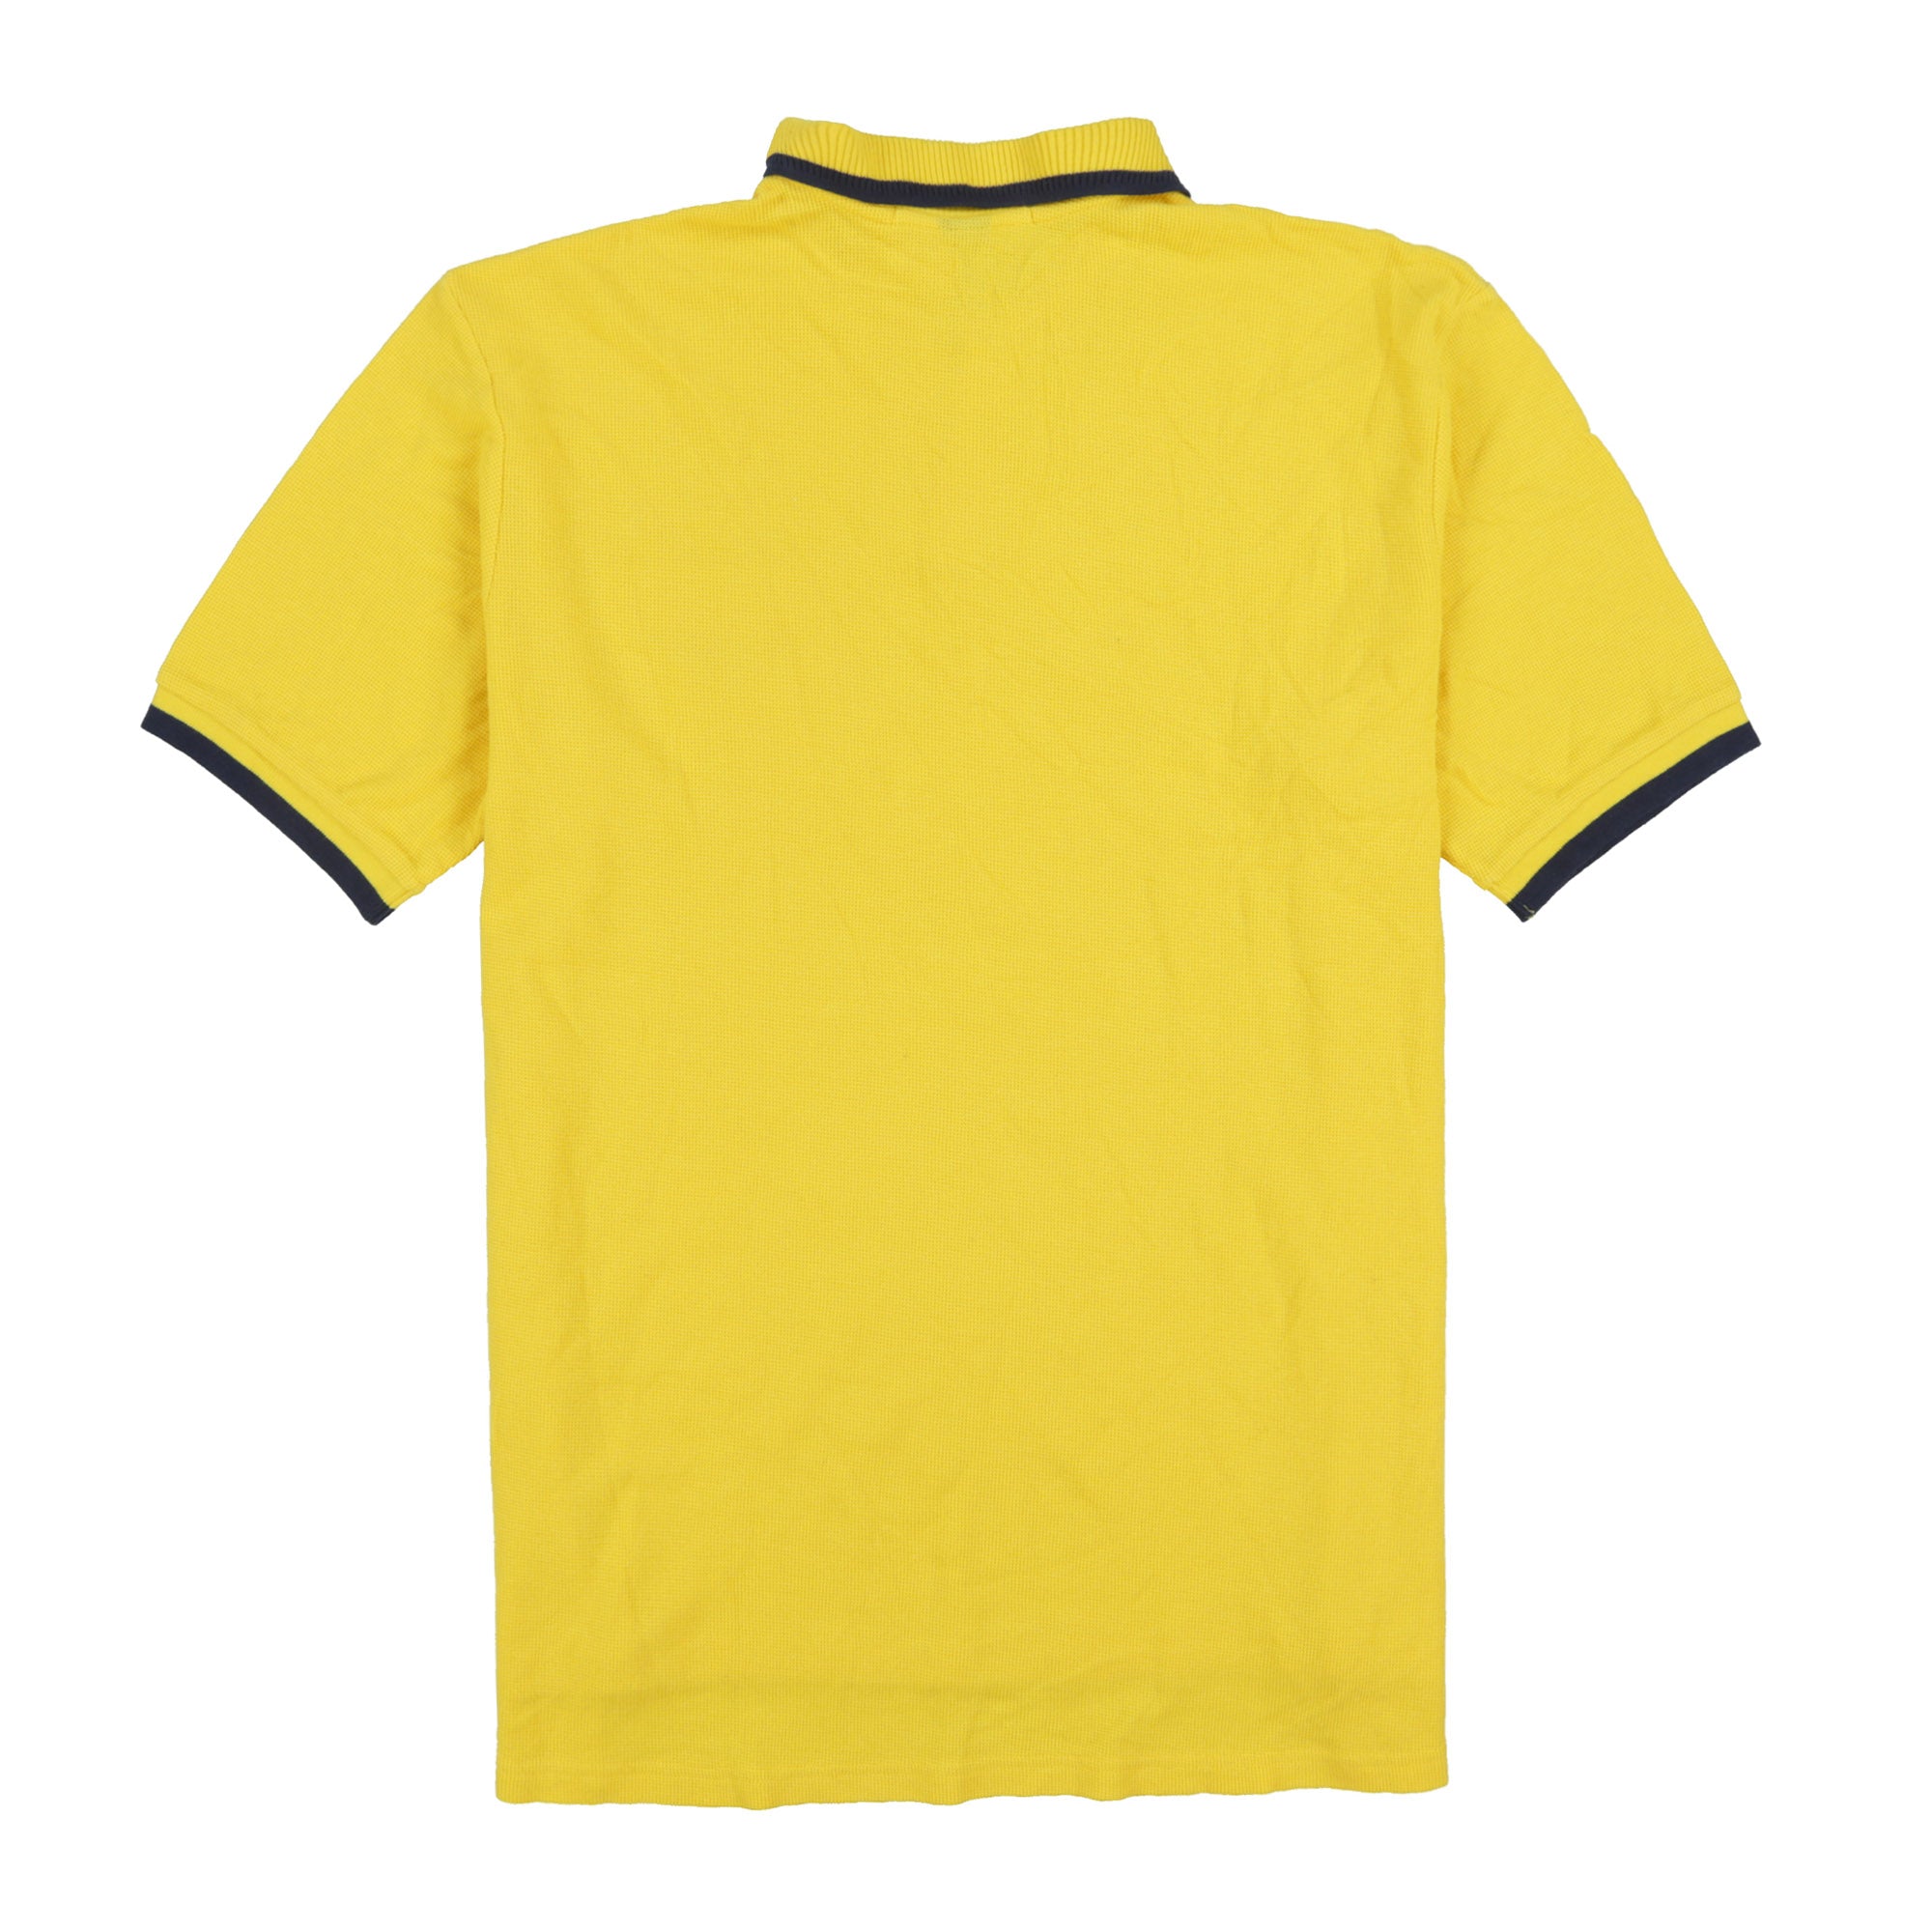 POLO SPORT EMB SPELL OUT SS POCKET POLO // YELLOW